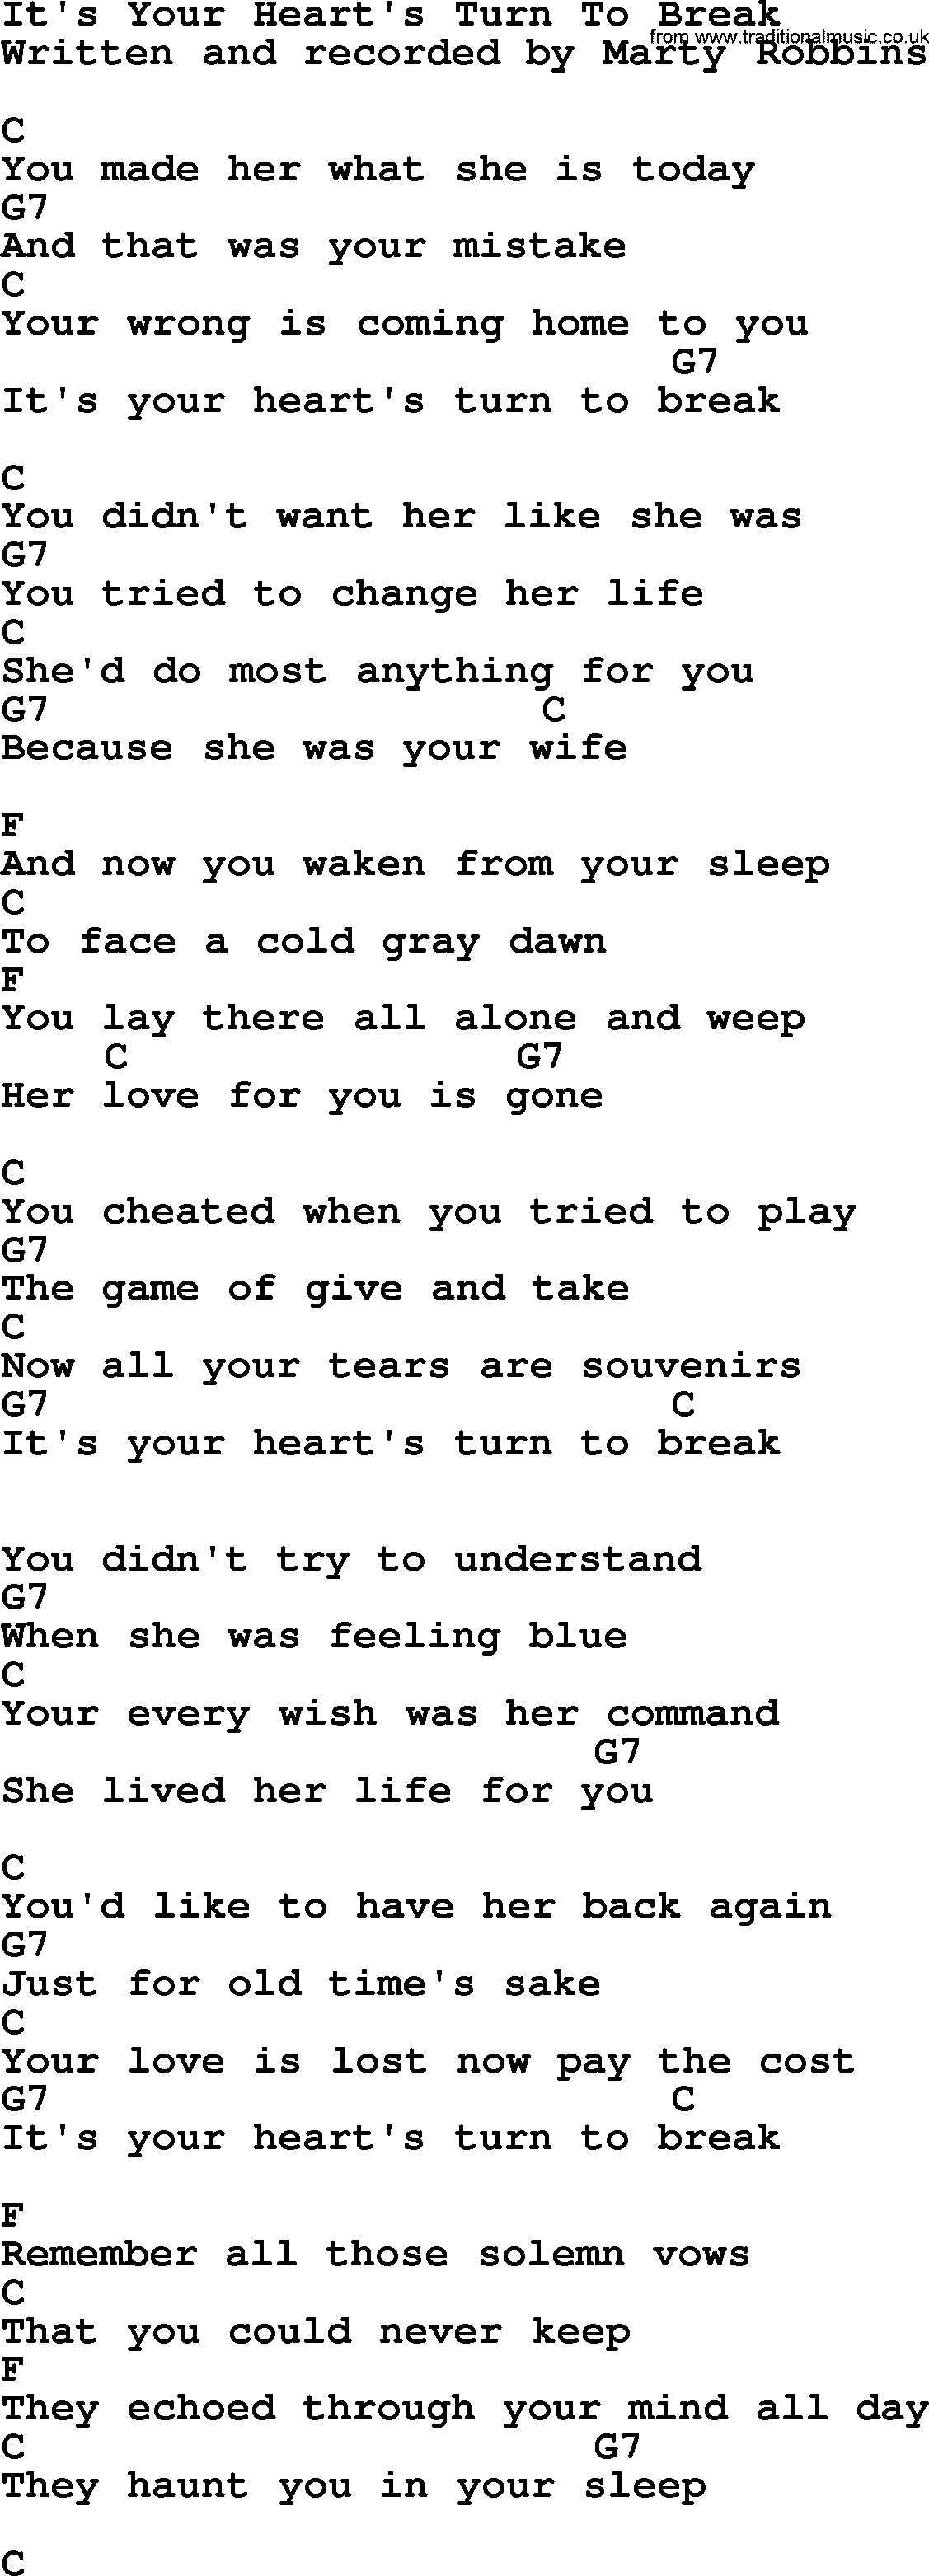 Marty Robbins song: It's Your Heart's Turn To Break, lyrics and chords